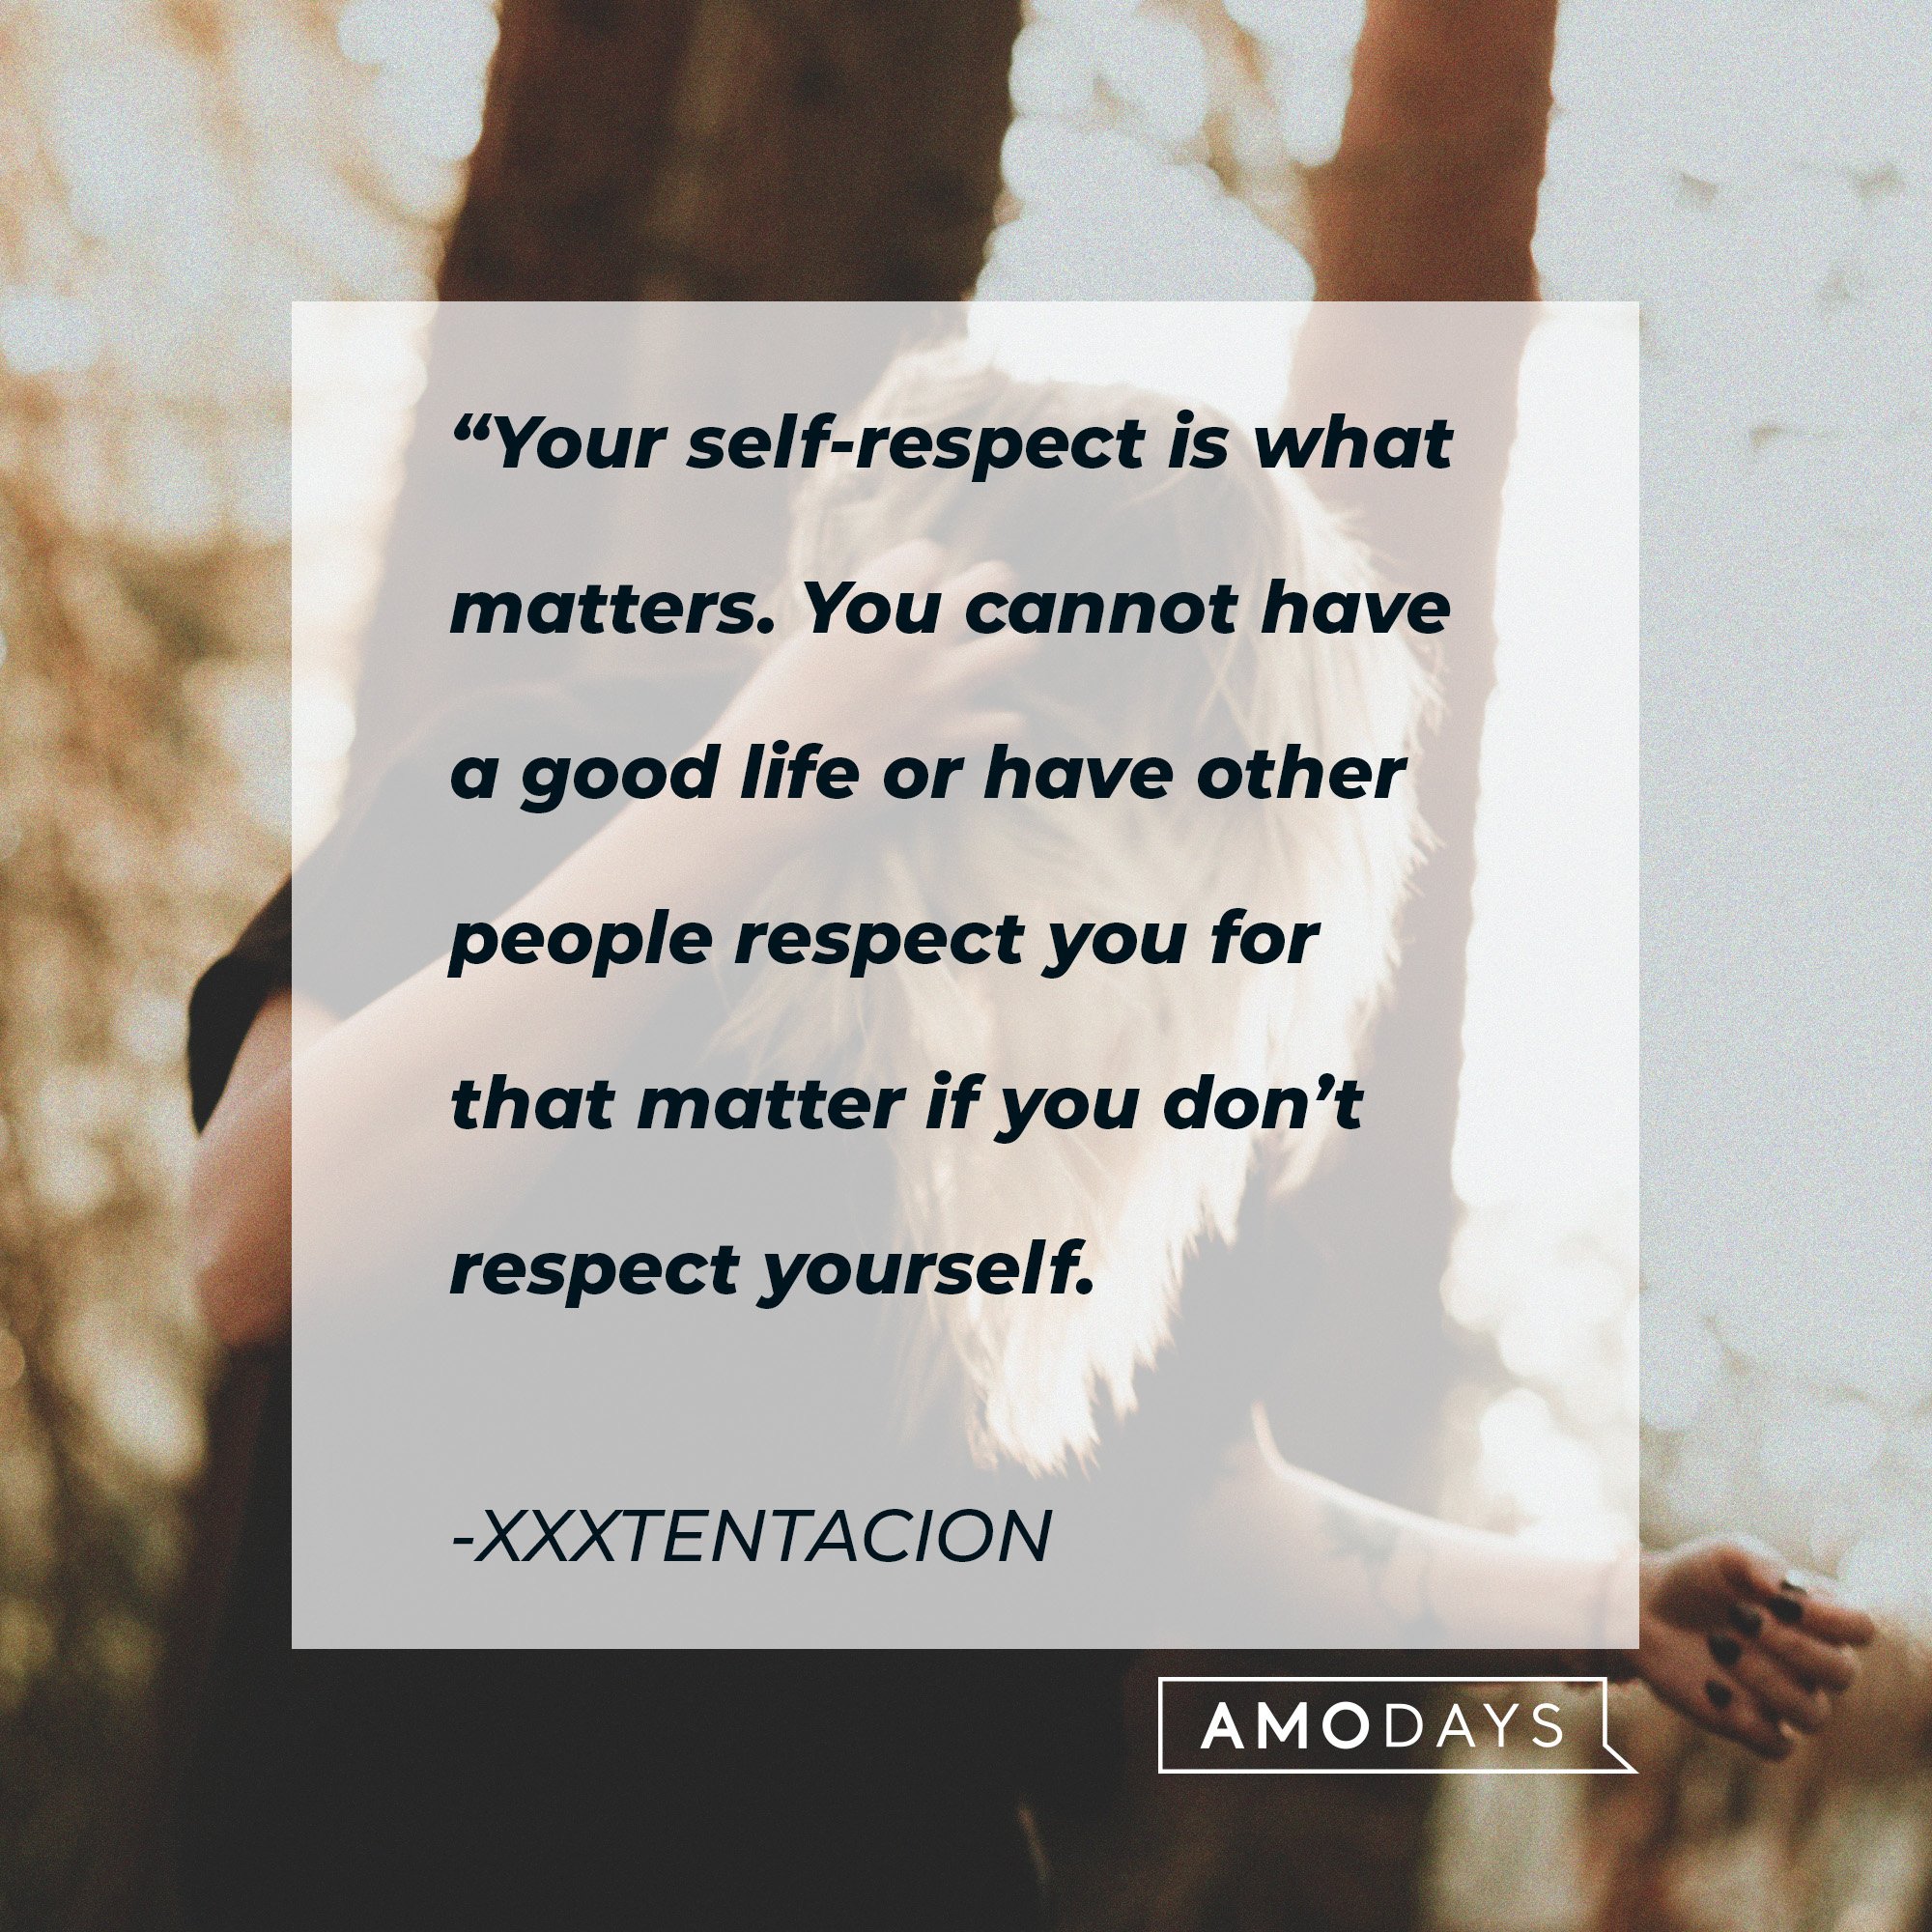 Xxxtentacion’s quote: “Your self-respect is what matters. You cannot have a good life or have other people respect you for that matter if you don’t respect yourself.”  | Image: AmoDays